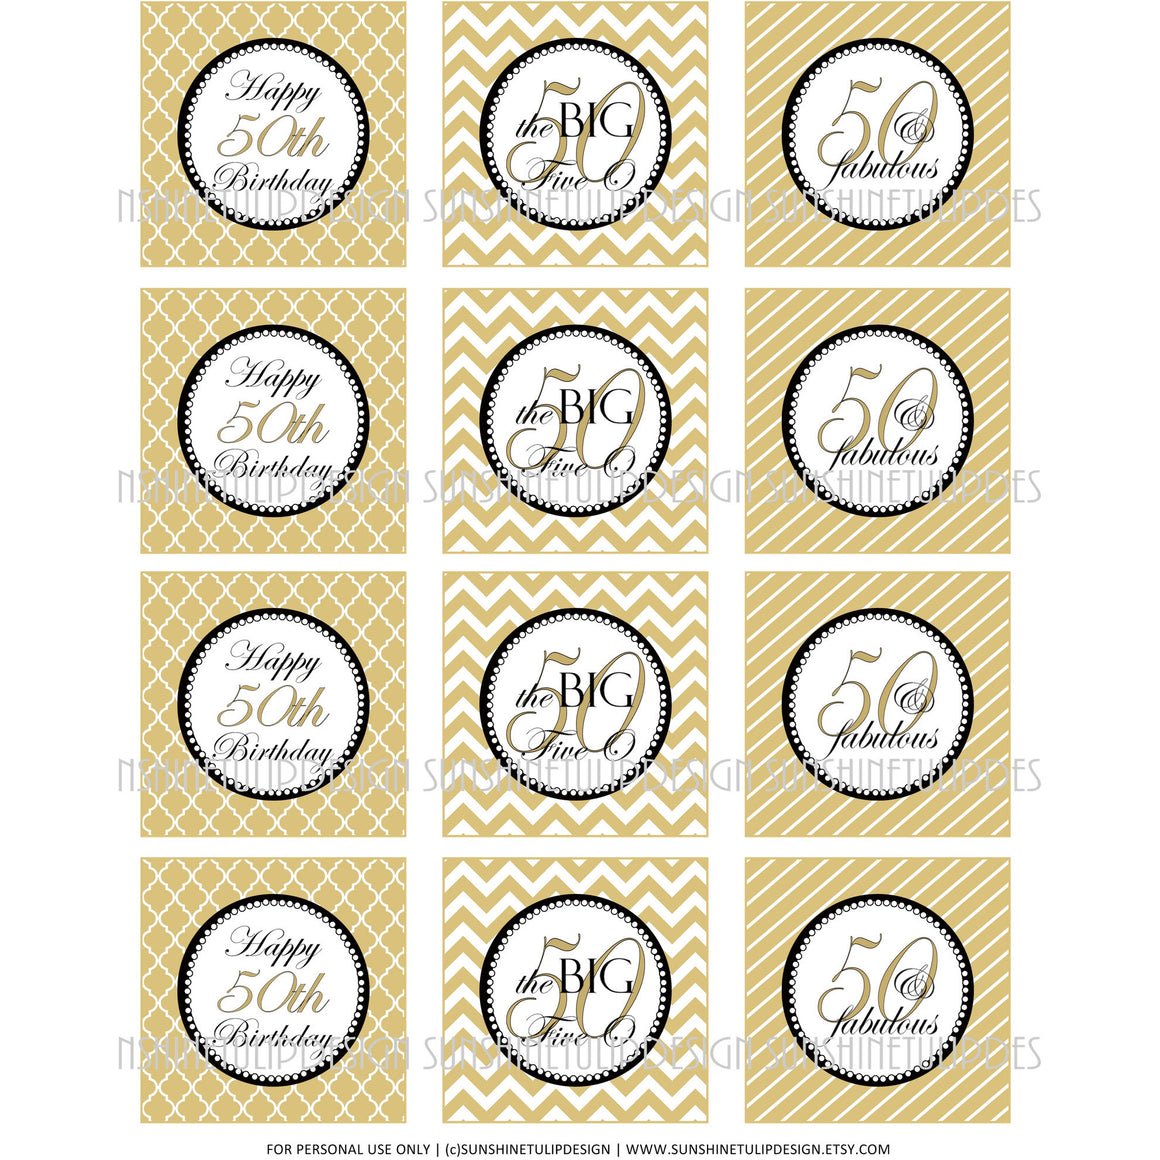 Printable 50th Birthday Cupcake Toppers, Sticker Labels & Party Favor Tags - Sunshinetulipdesign